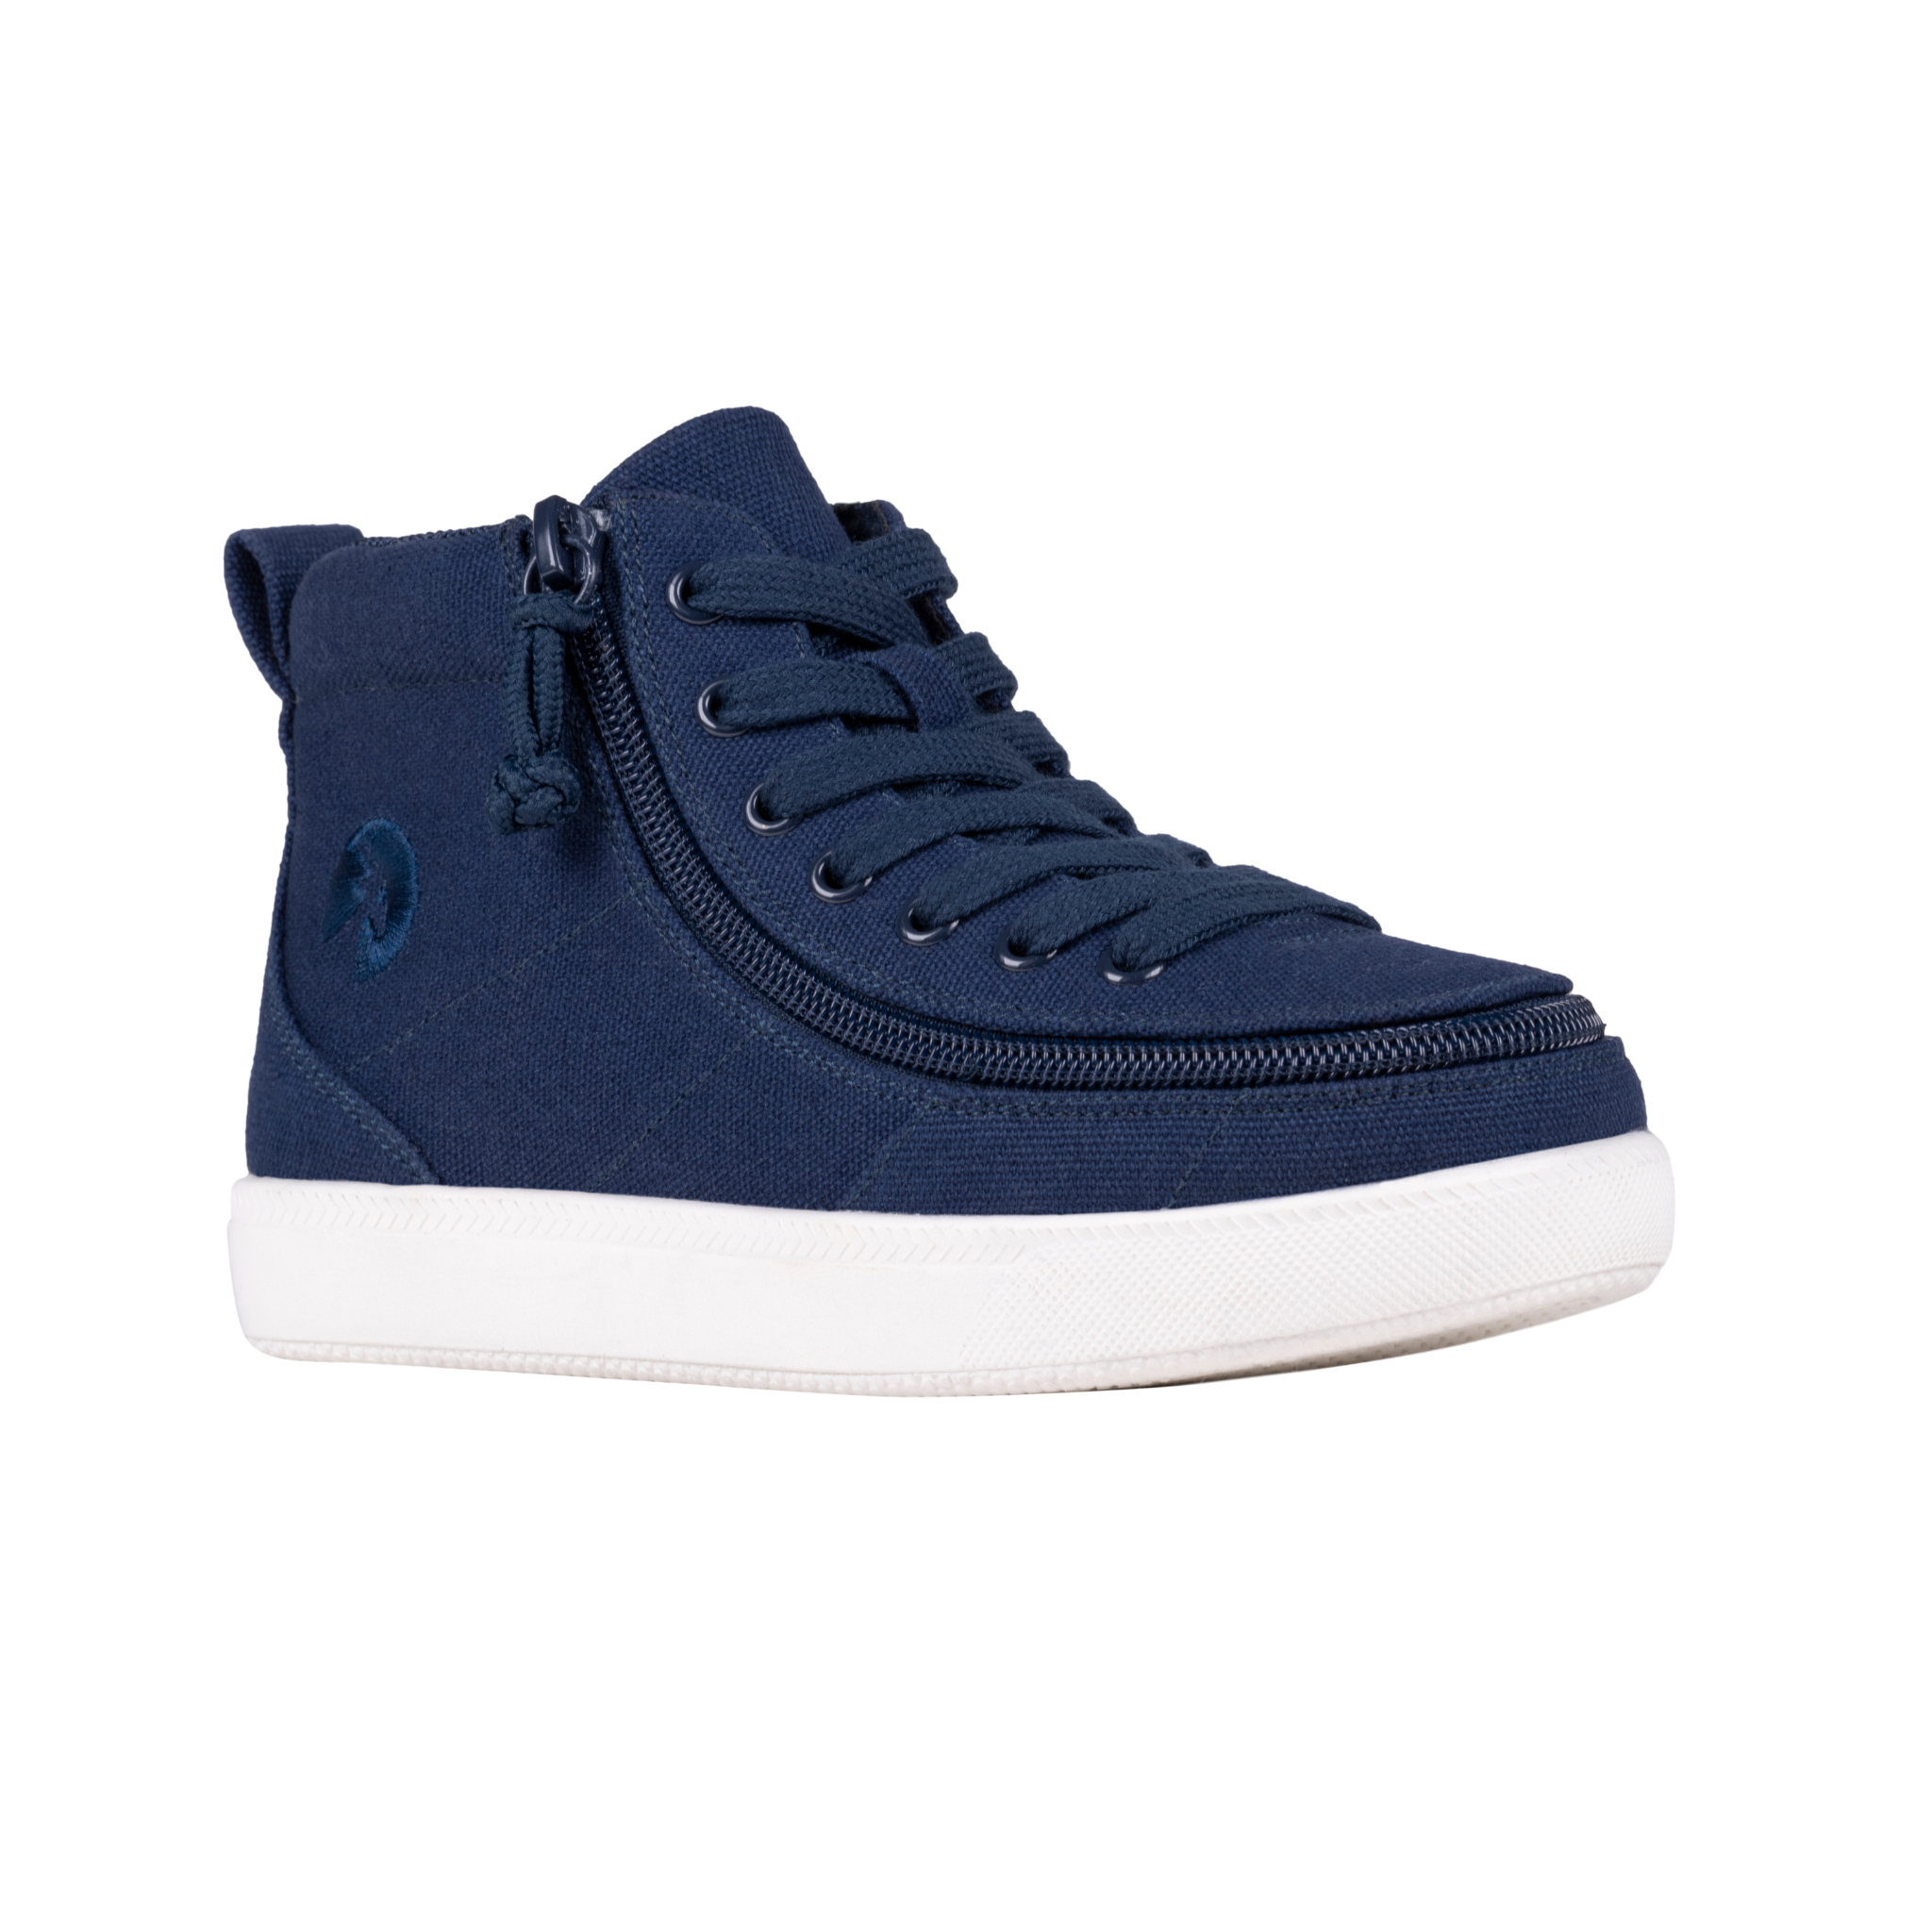 Billy Footwear (Kids) DR II Fit - High Top DR II Navy Canvas Shoes